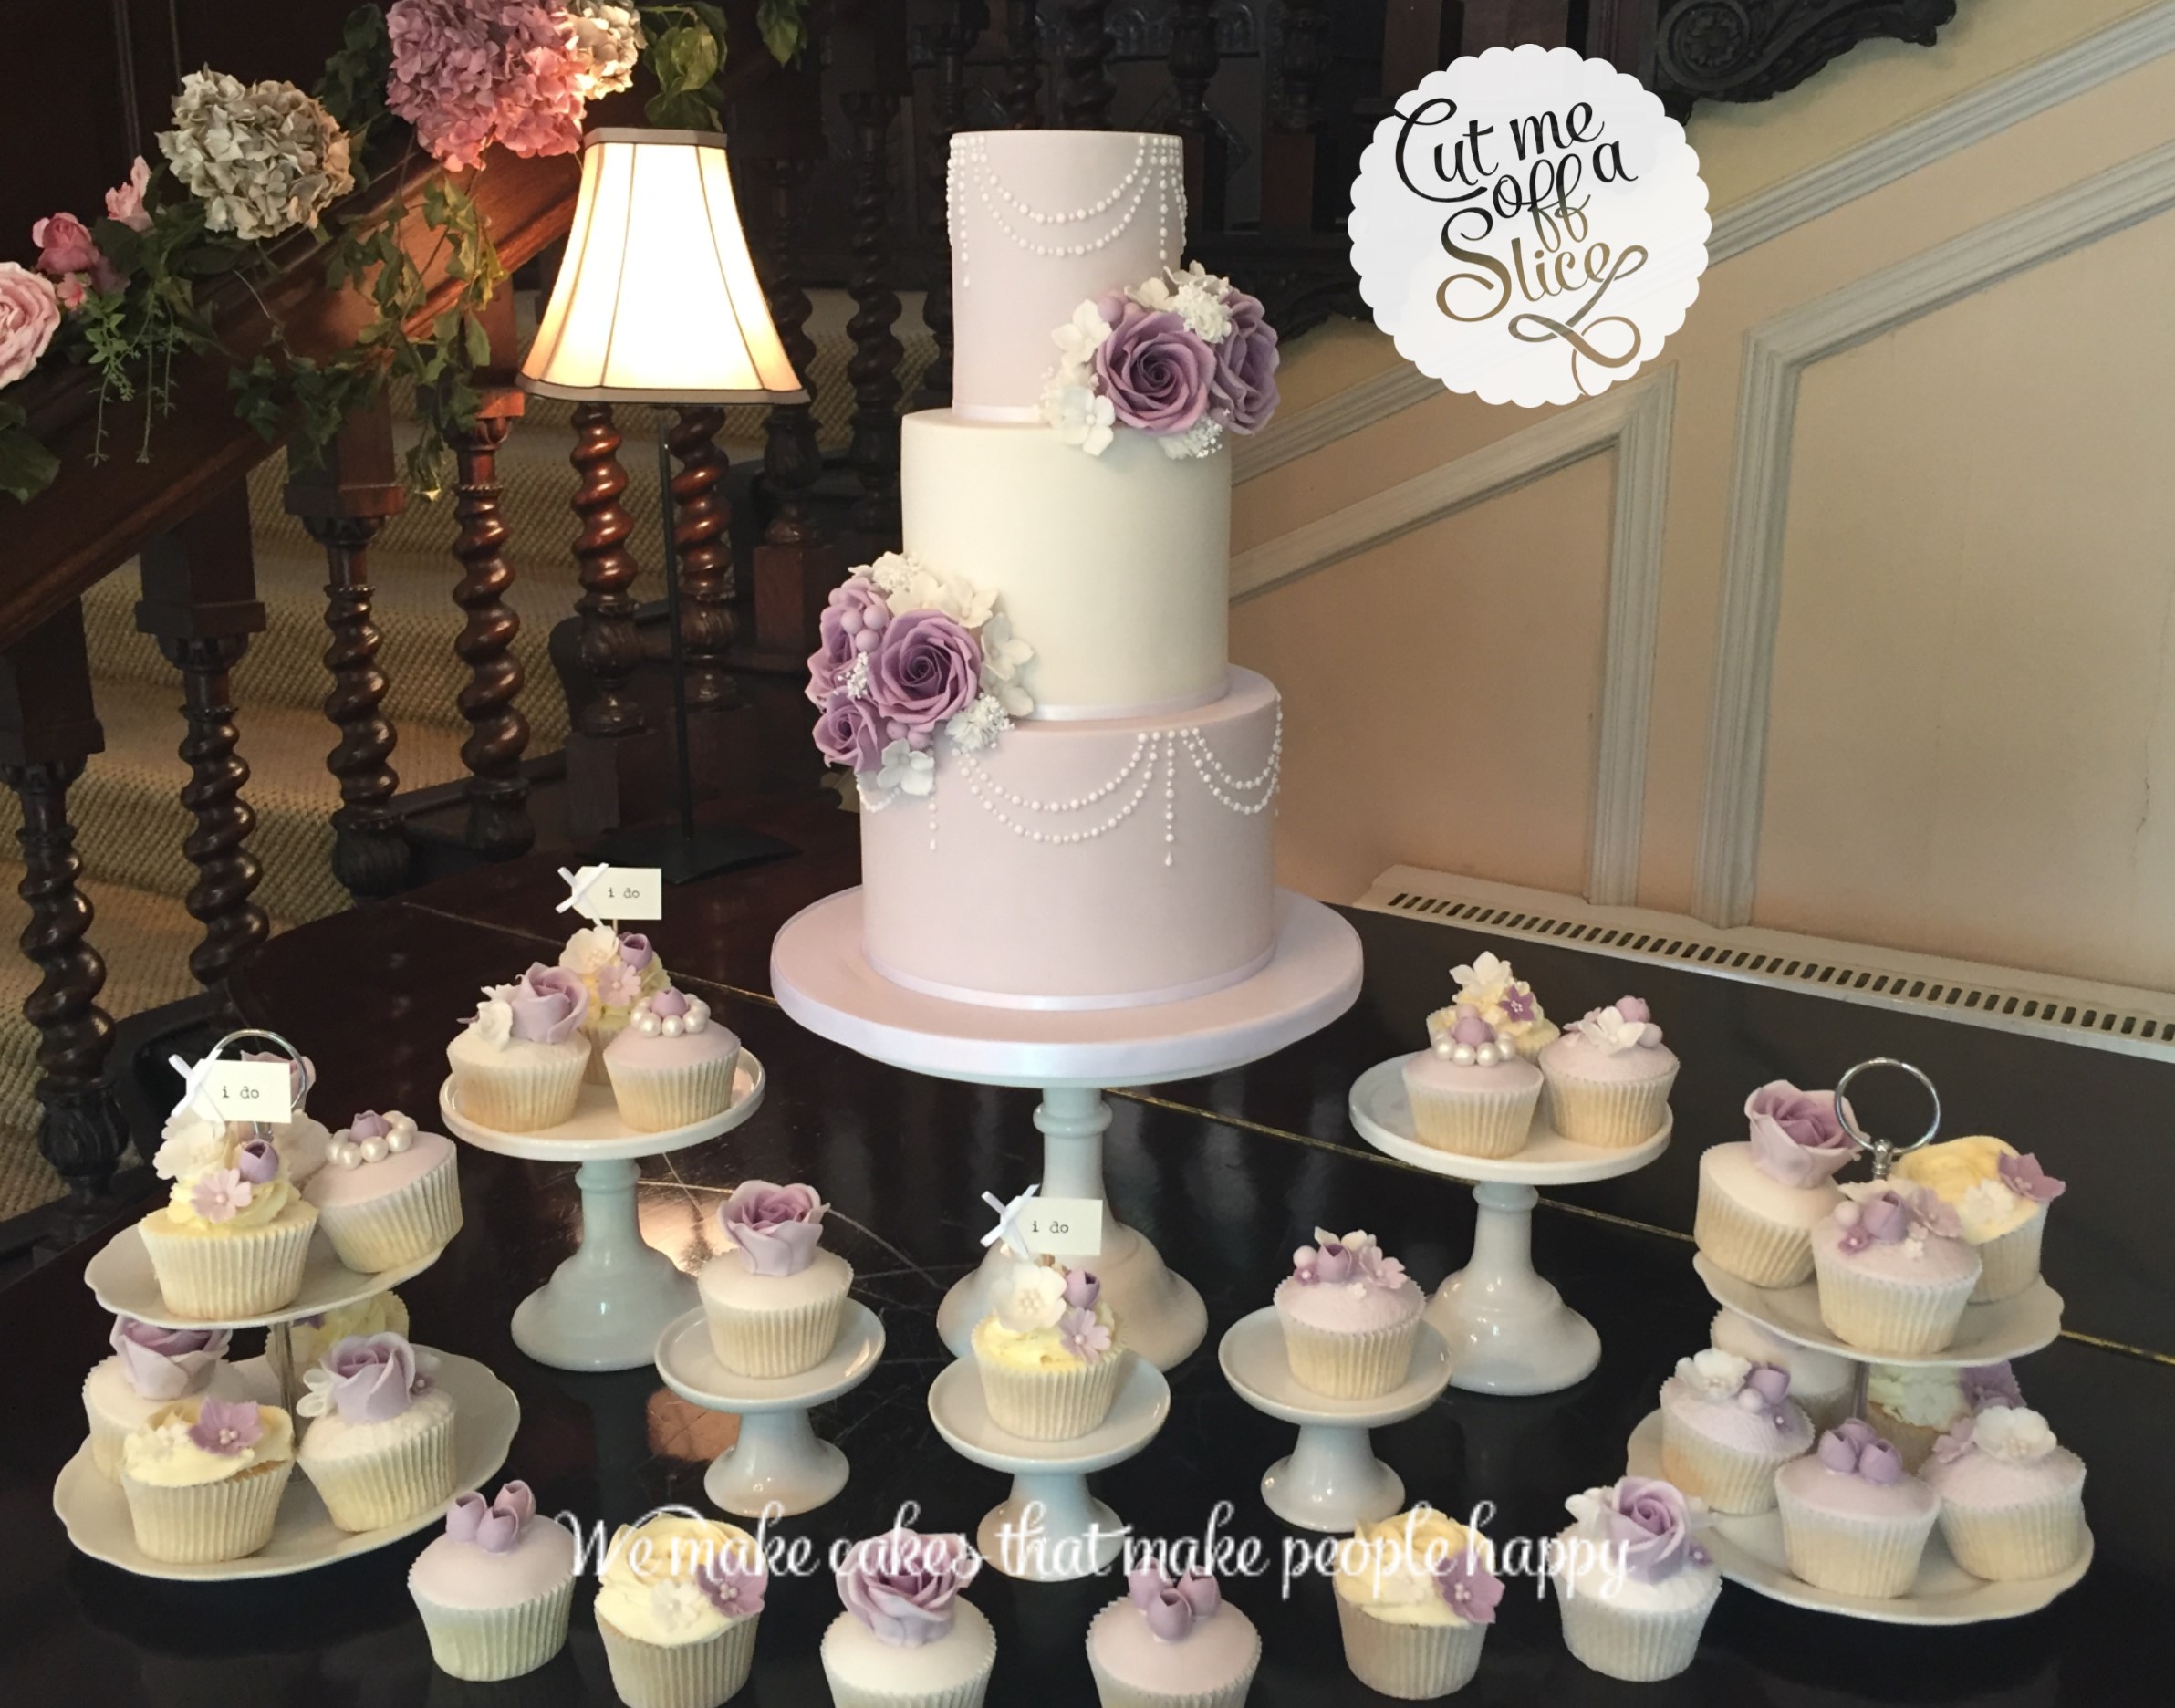 Cake Tables - Wedding Cakes , Cut me off a slice, the cake makers for Devon and Cornwall2384 x 1872